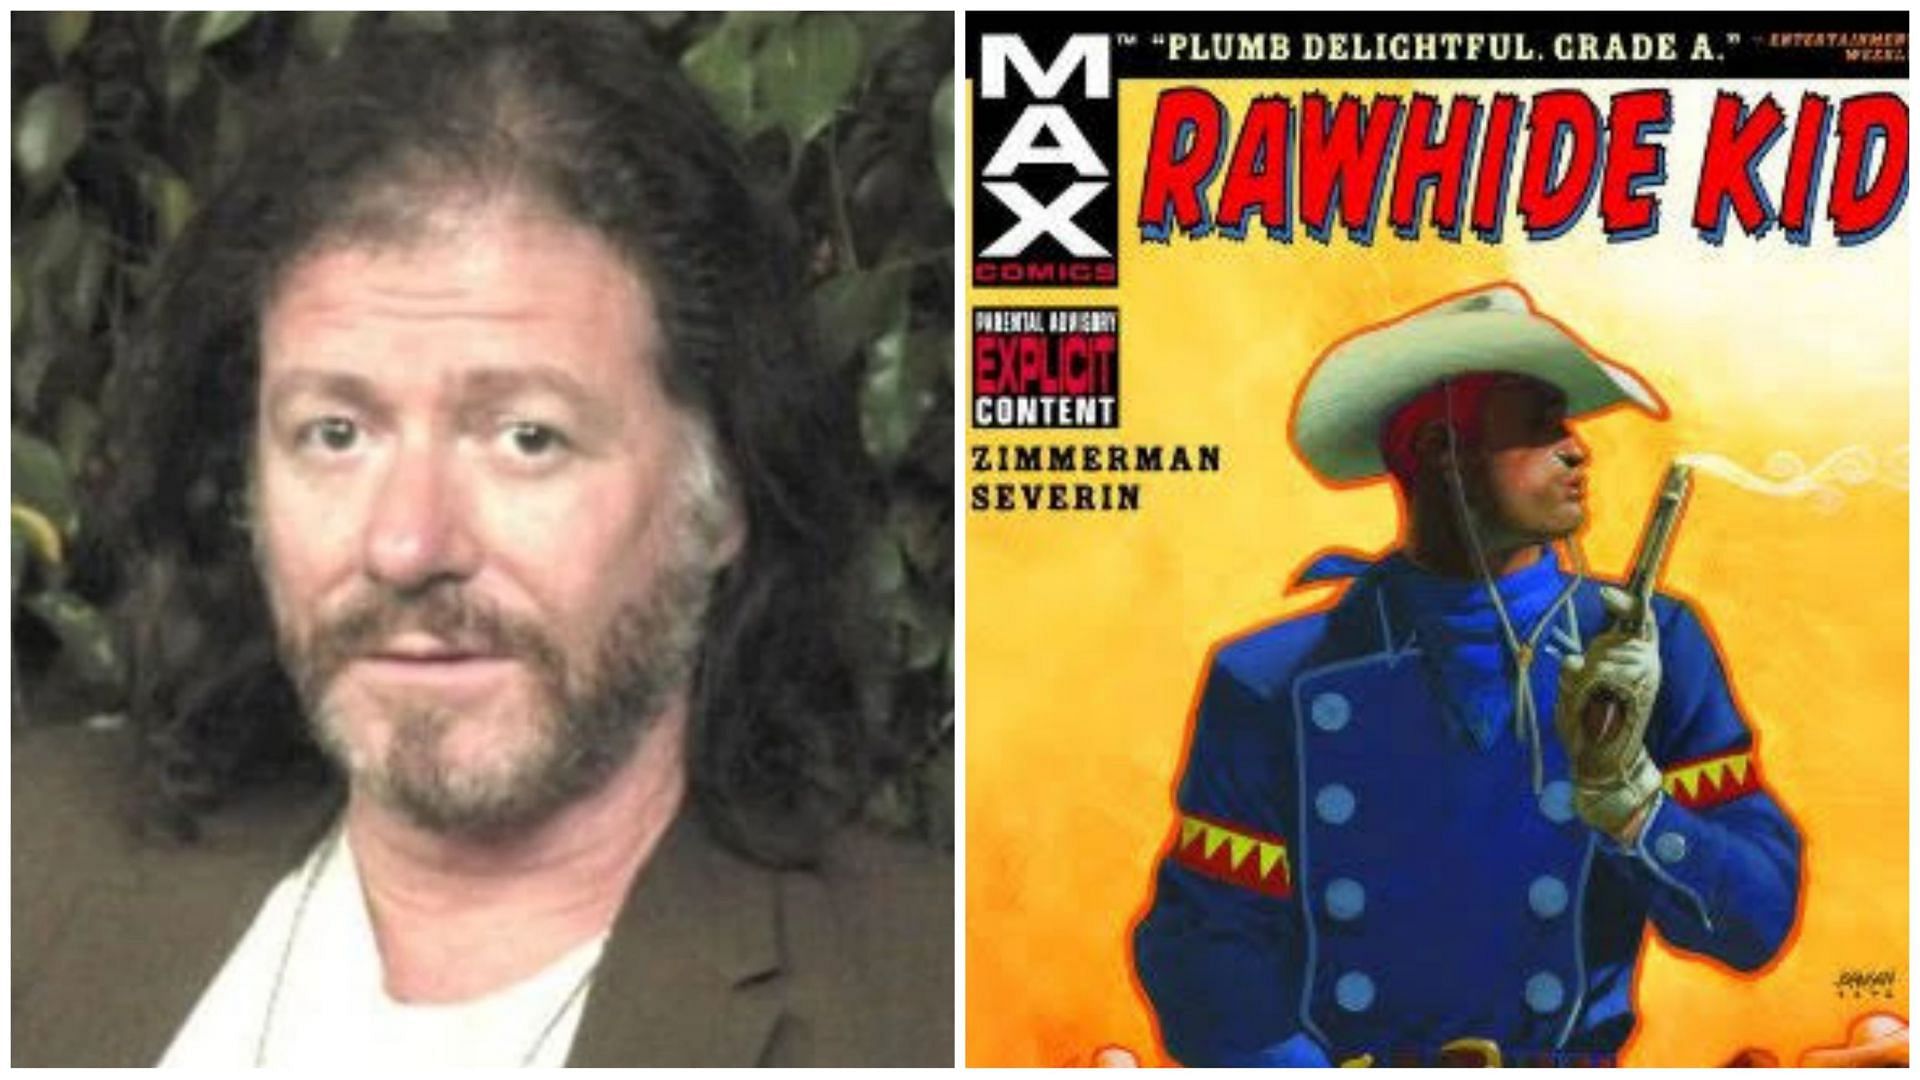 Ron Zimmerman and the cover for Rawhide Kid (Image via Twitter/renmusb1 and Marvel Comics)